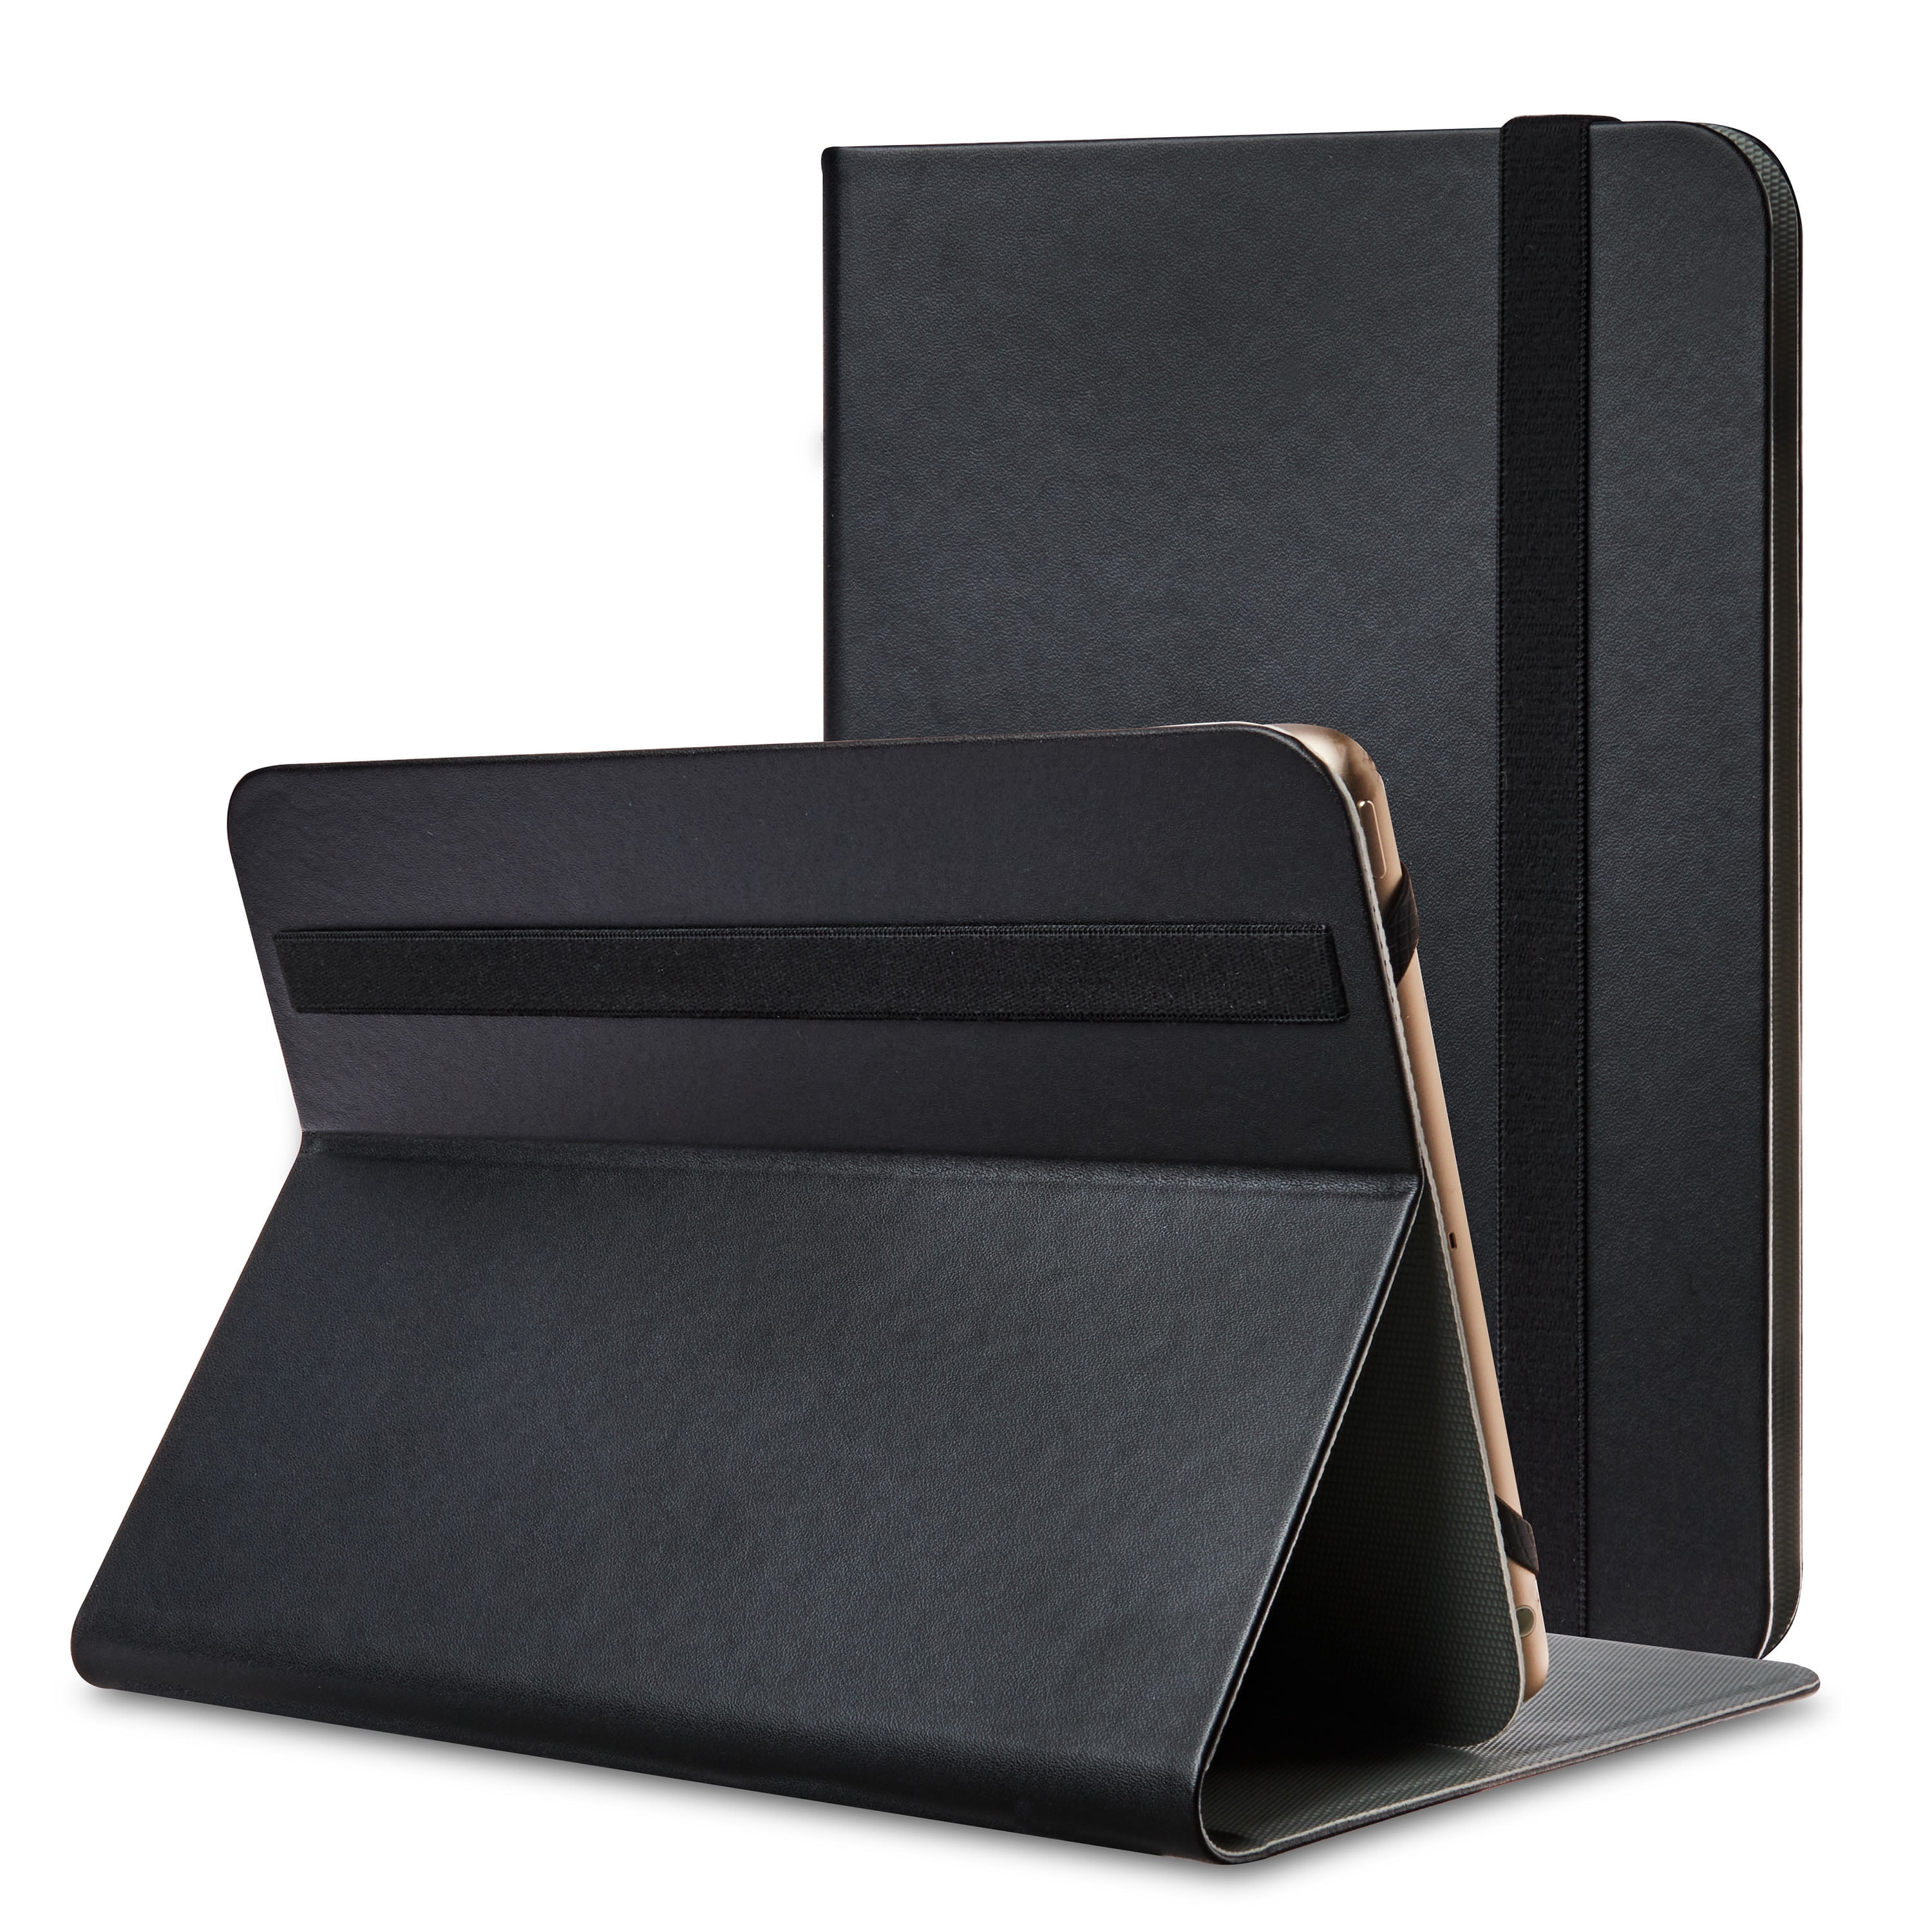 9.7Inch Case Colorful Design Leather Stand Case for Apple iPad Air Bear Village iPad Air Black 1 Anti Scratch Shell with Adjust Stand 9.7Inch